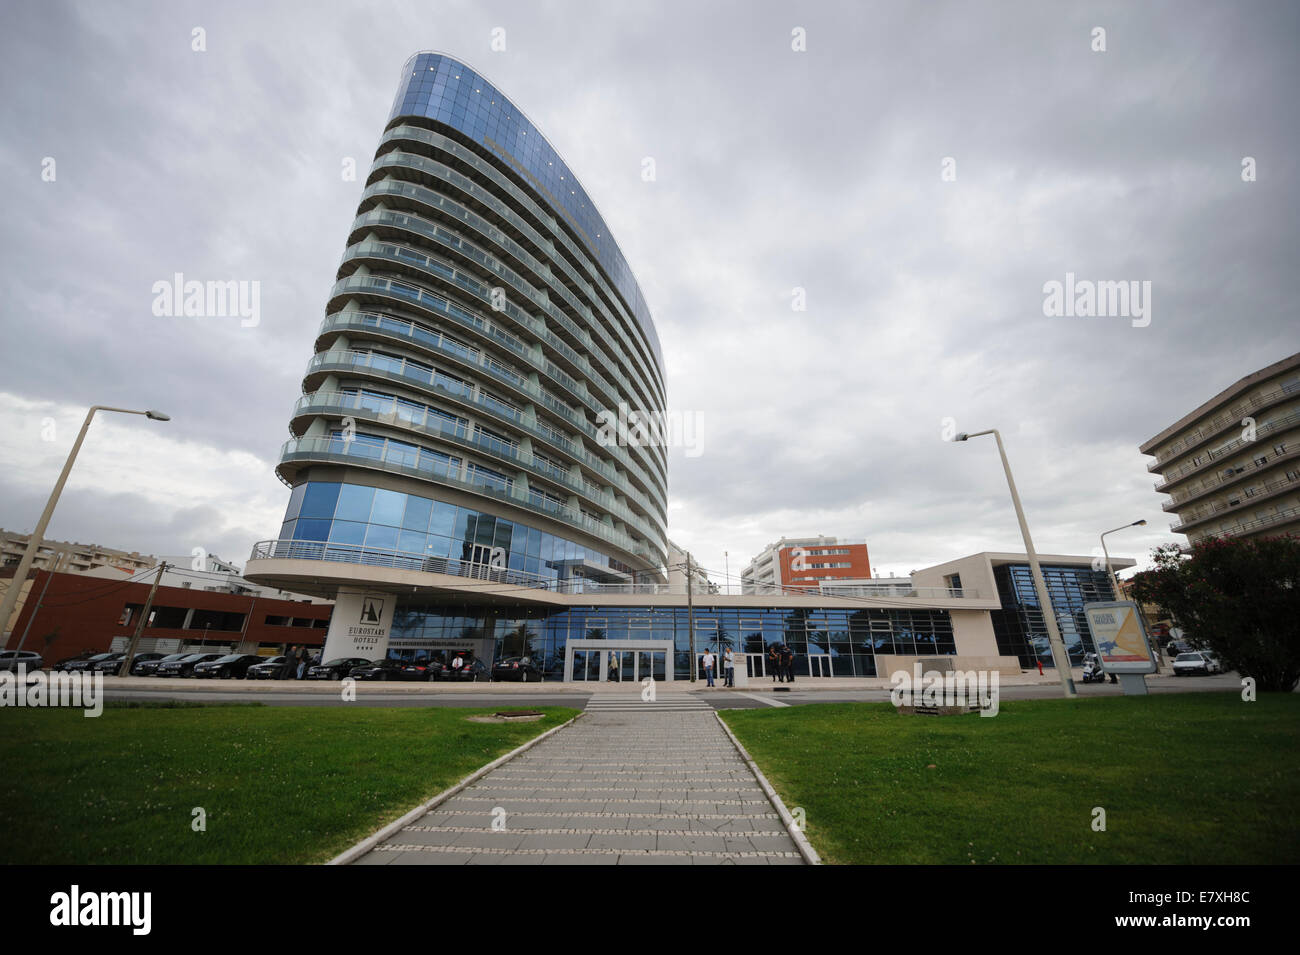 Building with modern architecture and curved glass balconies Stock Photo